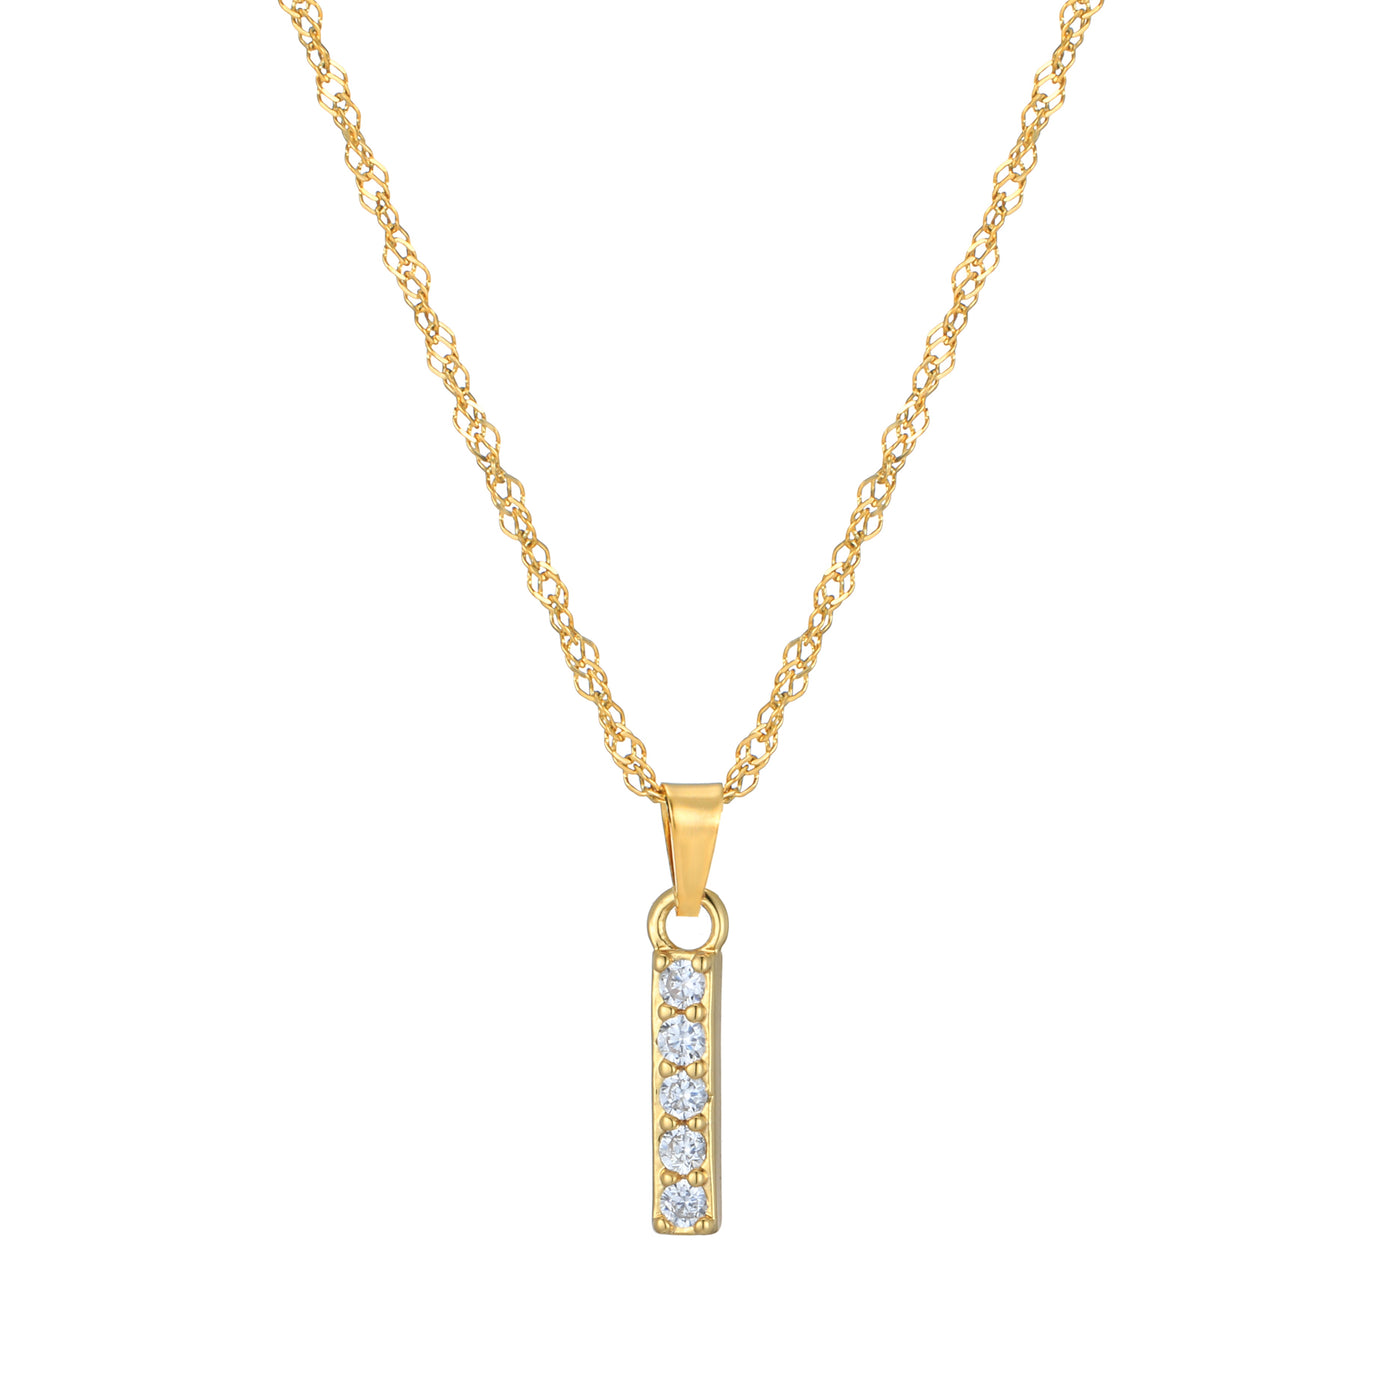 Letter necklace with zirconia